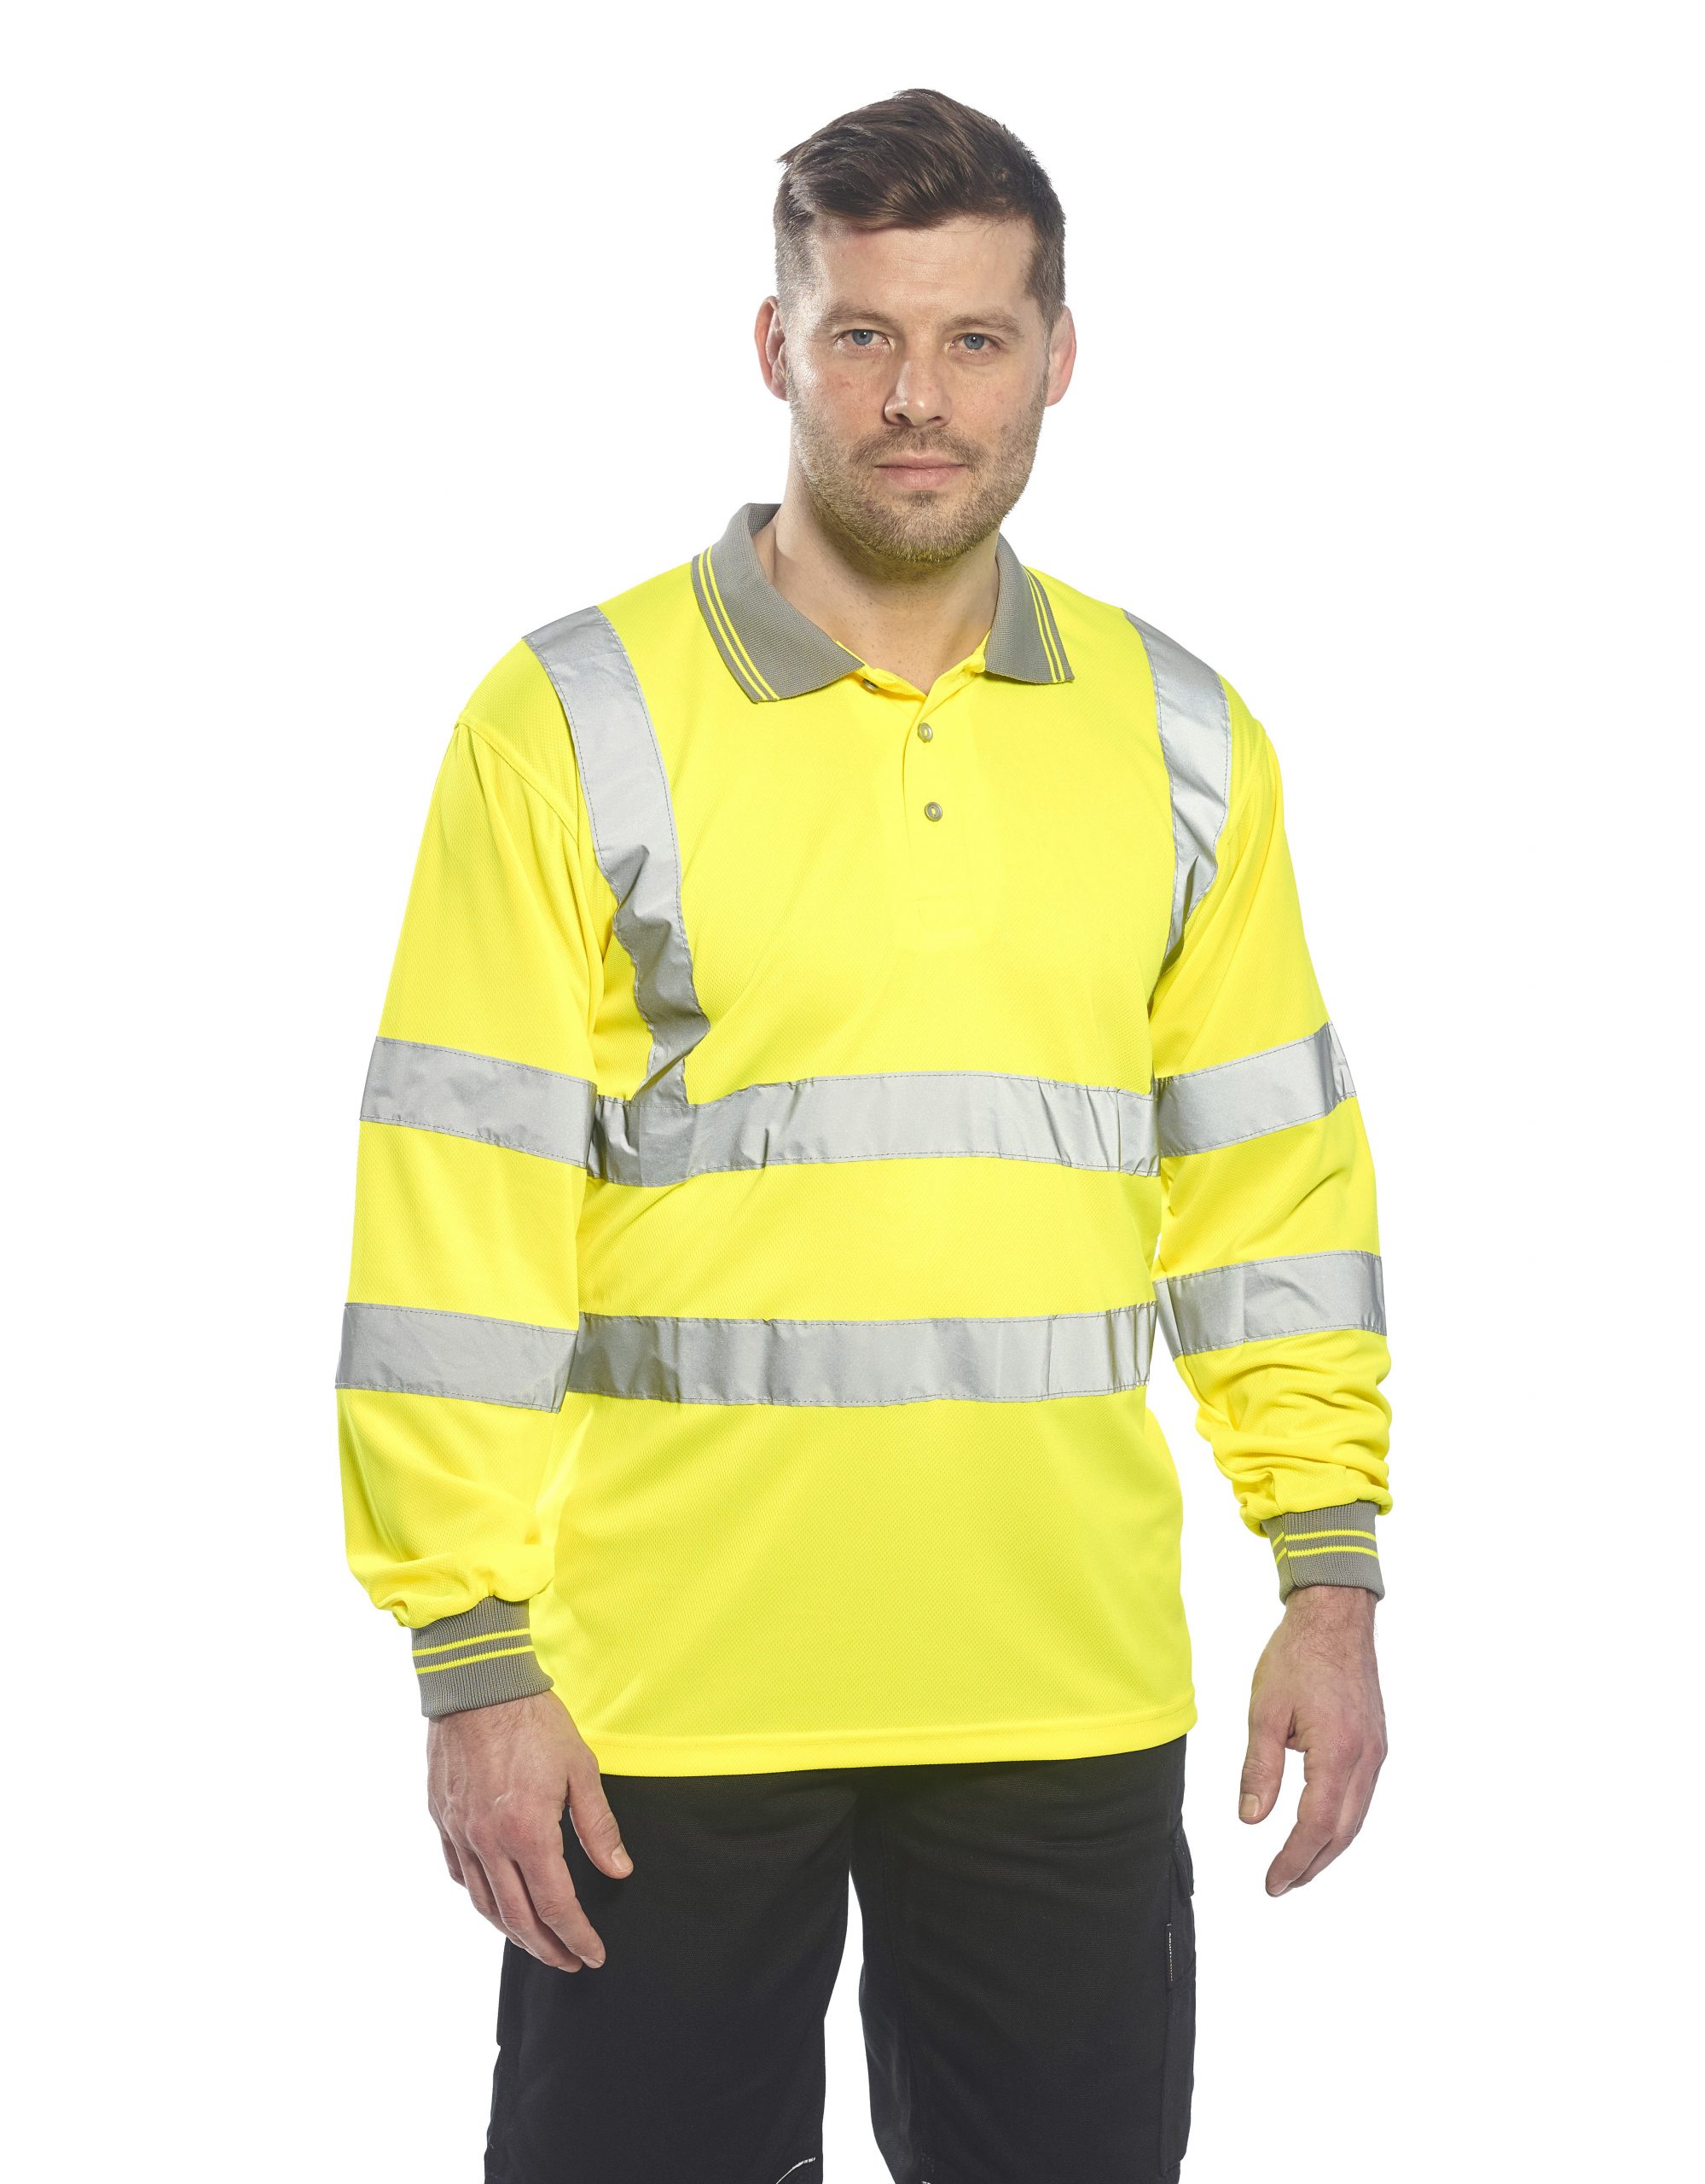 Style 2,Yellow,4XL ZUJA Safety Hi Vis Polo Short Sleeve with Bright Visibility Tape Moisture Wicking Shirts Mens Construction Protective Workwear